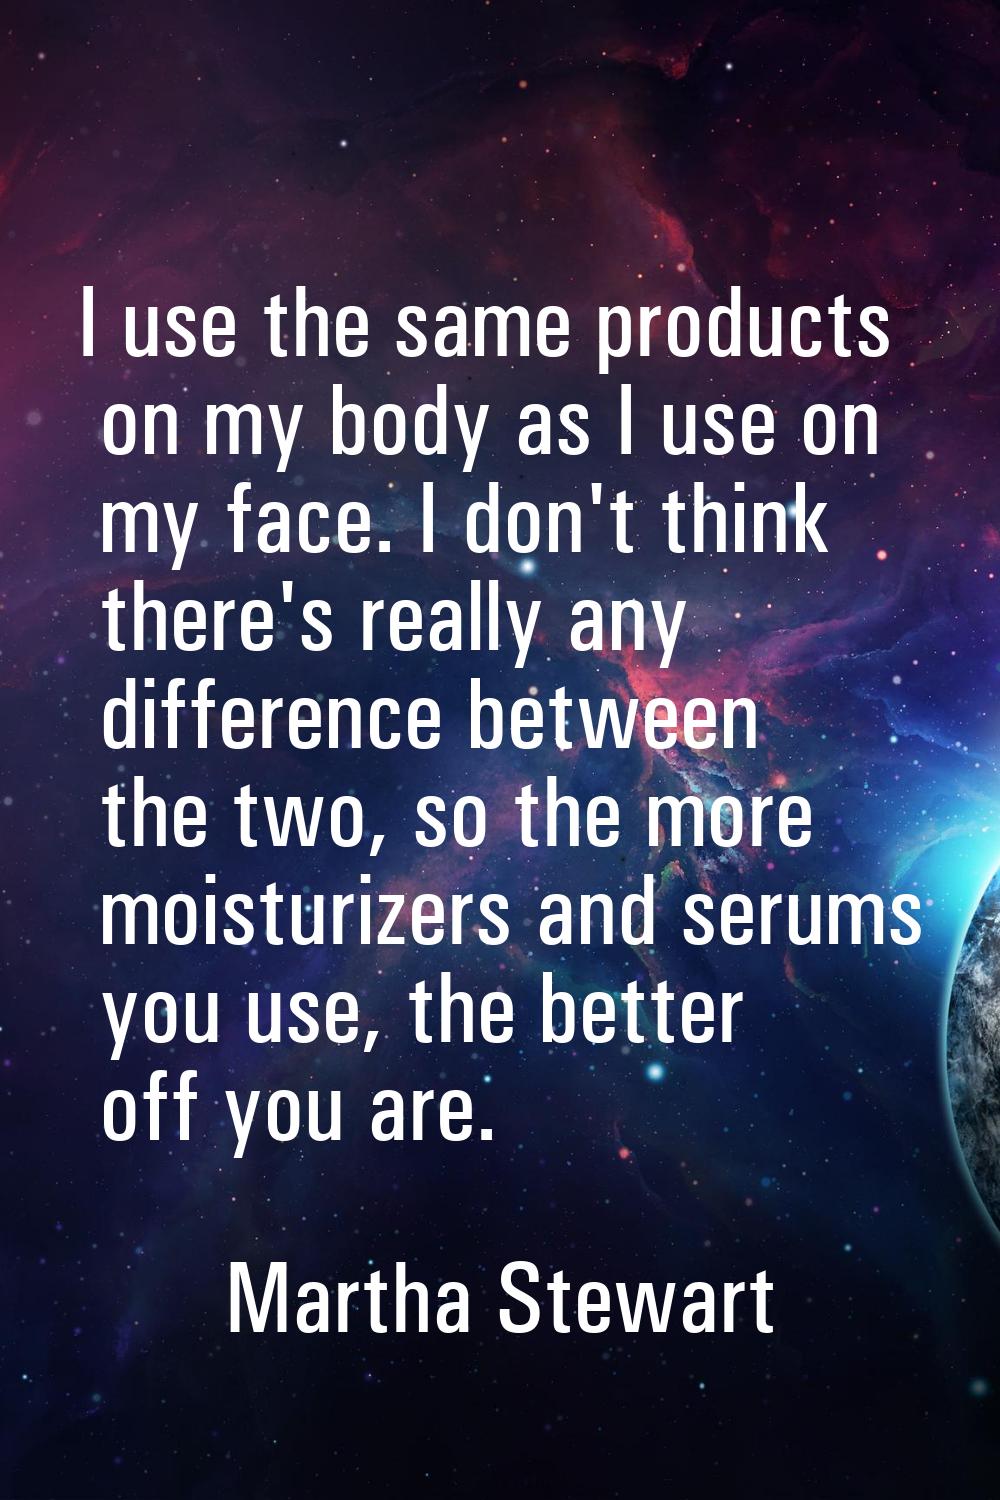 I use the same products on my body as I use on my face. I don't think there's really any difference